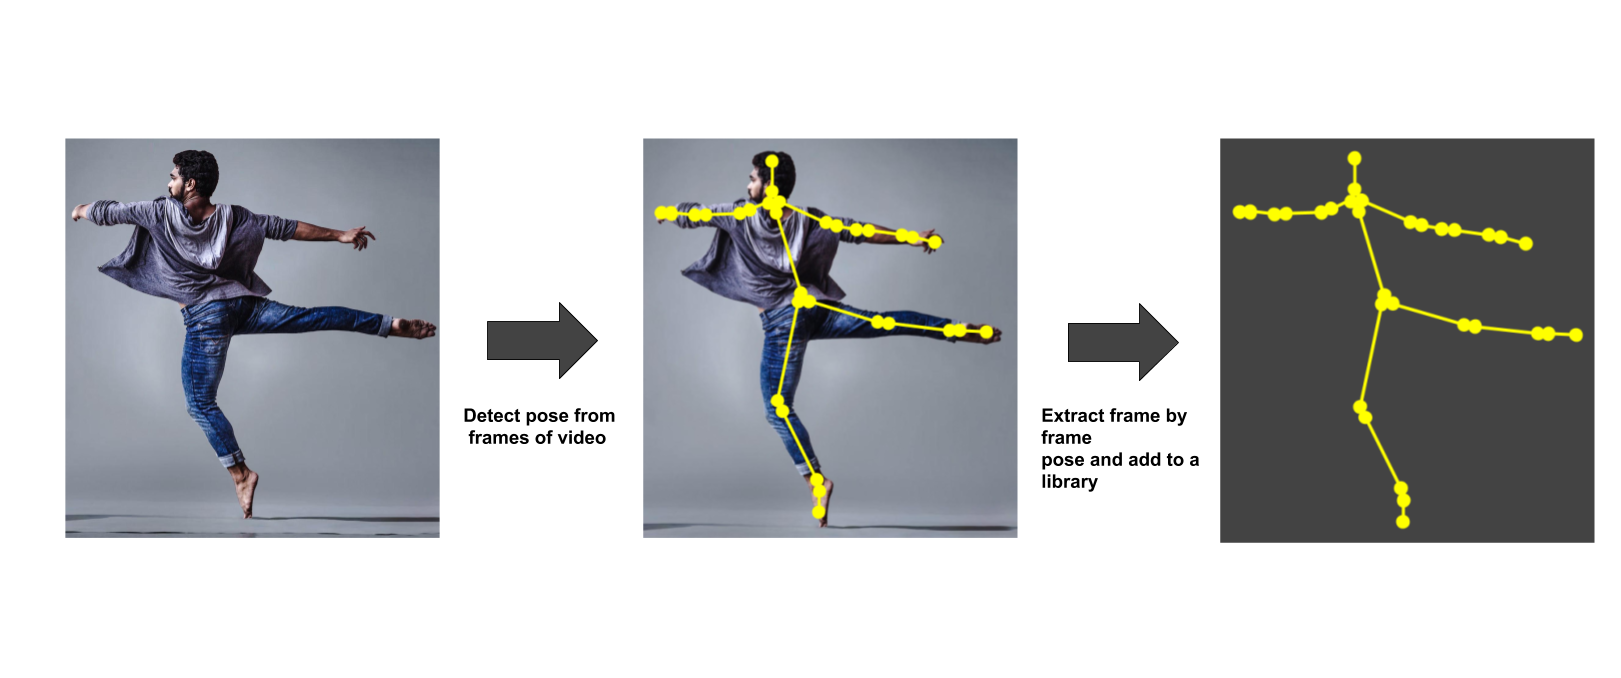 Weakly-Supervised 3D Human Pose Learning via Multi-View Images in the Wild